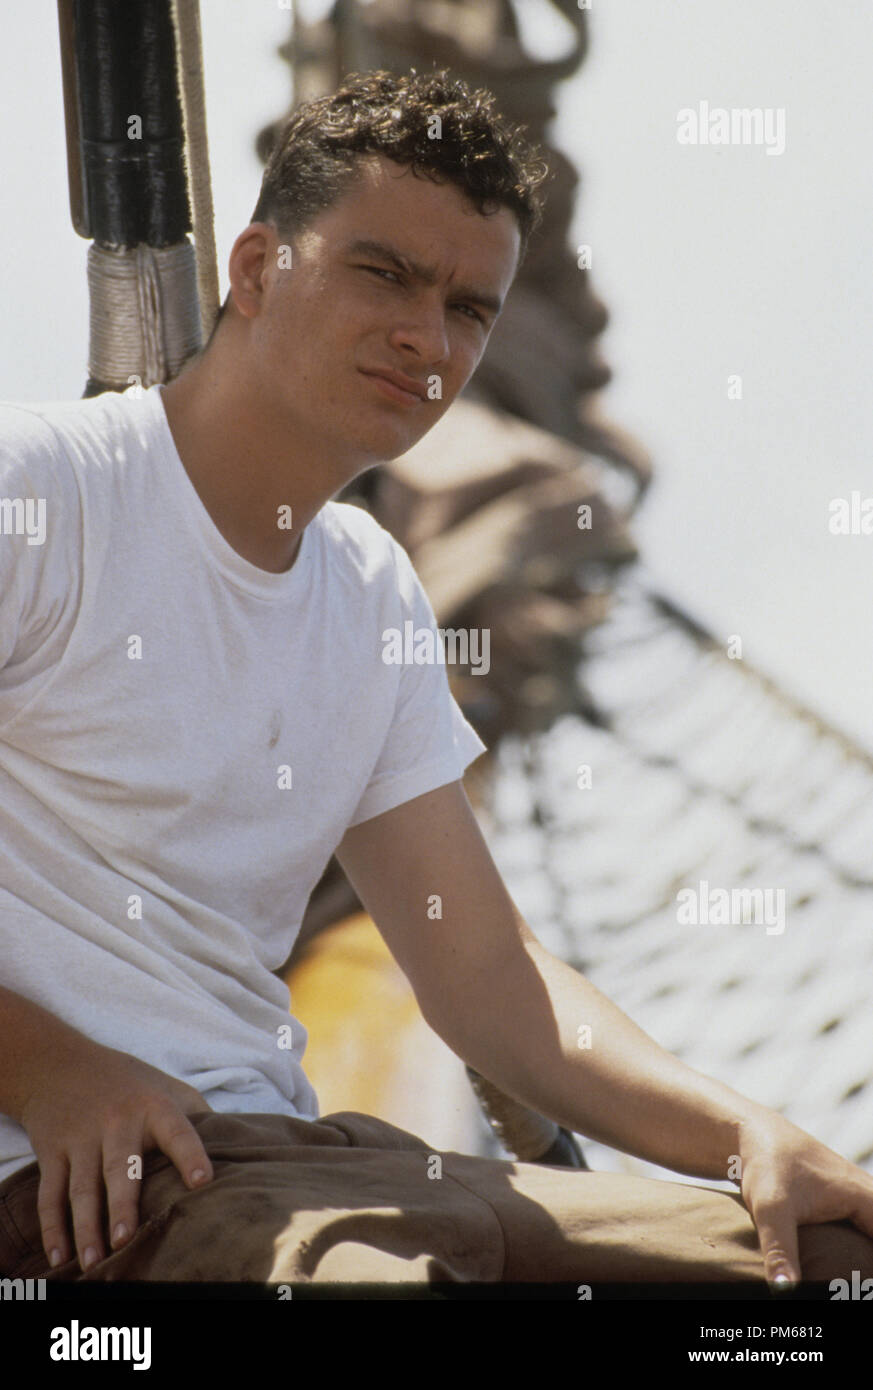 Film Still from 'White Squall' Balthazar Getty © 1996 Hollywood Pictures Photo Credit: Merrick Morton    File Reference # 31042025THA  For Editorial Use Only - All Rights Reserved Stock Photo